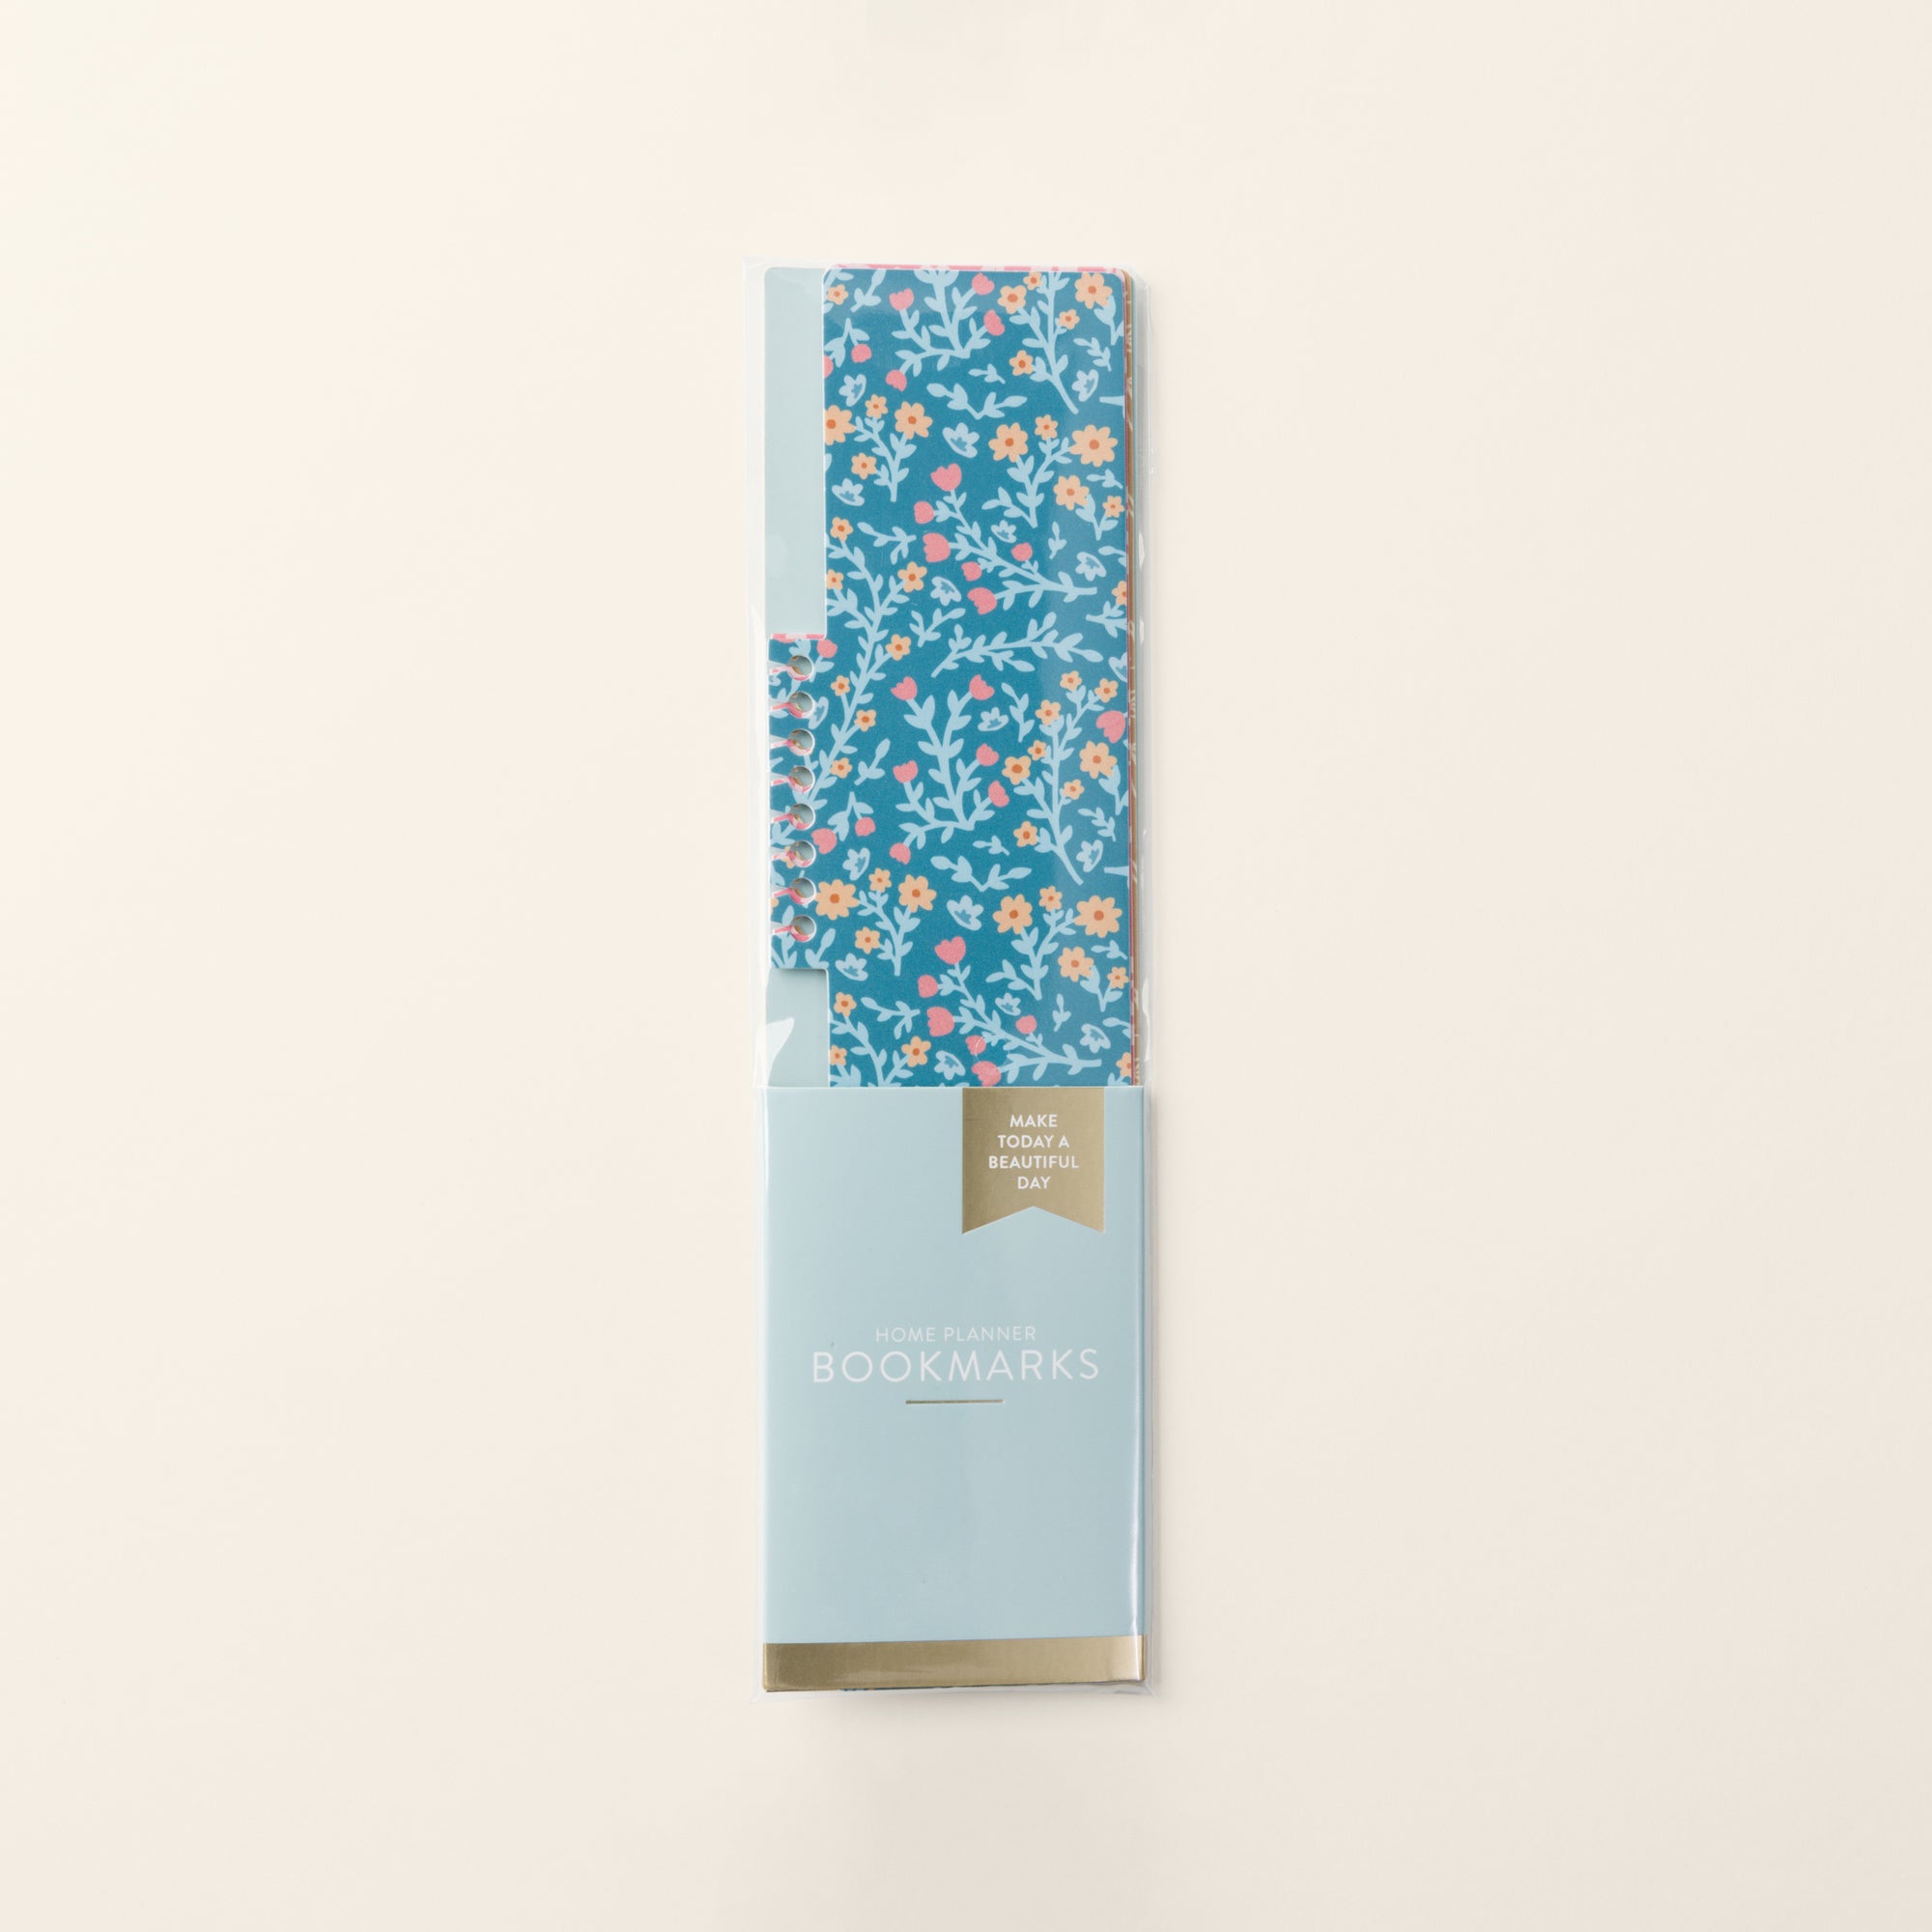 Images of 3 pop-in bookmark (blue, pink and yellow)